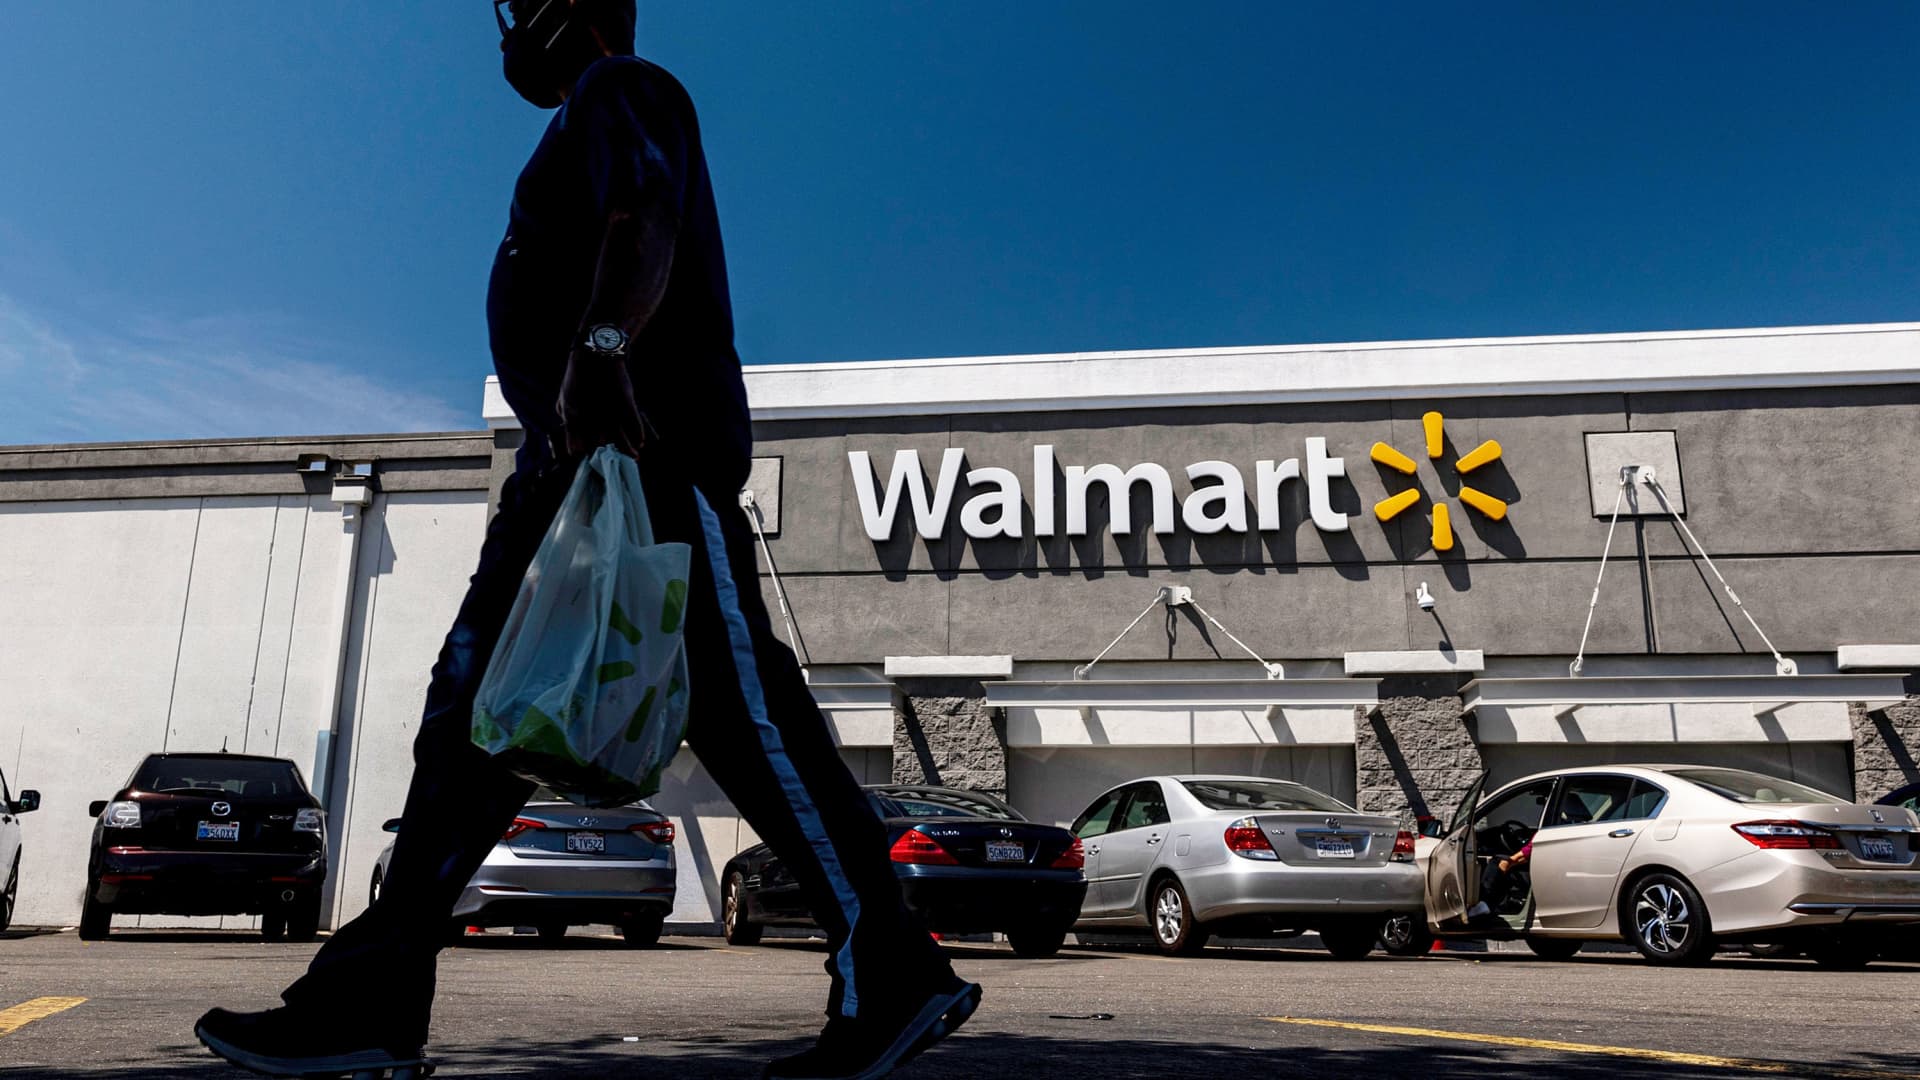 A shopper carries a bag outside a Walmart store in San Leandro, California, on Thursday, May 13, 2021.